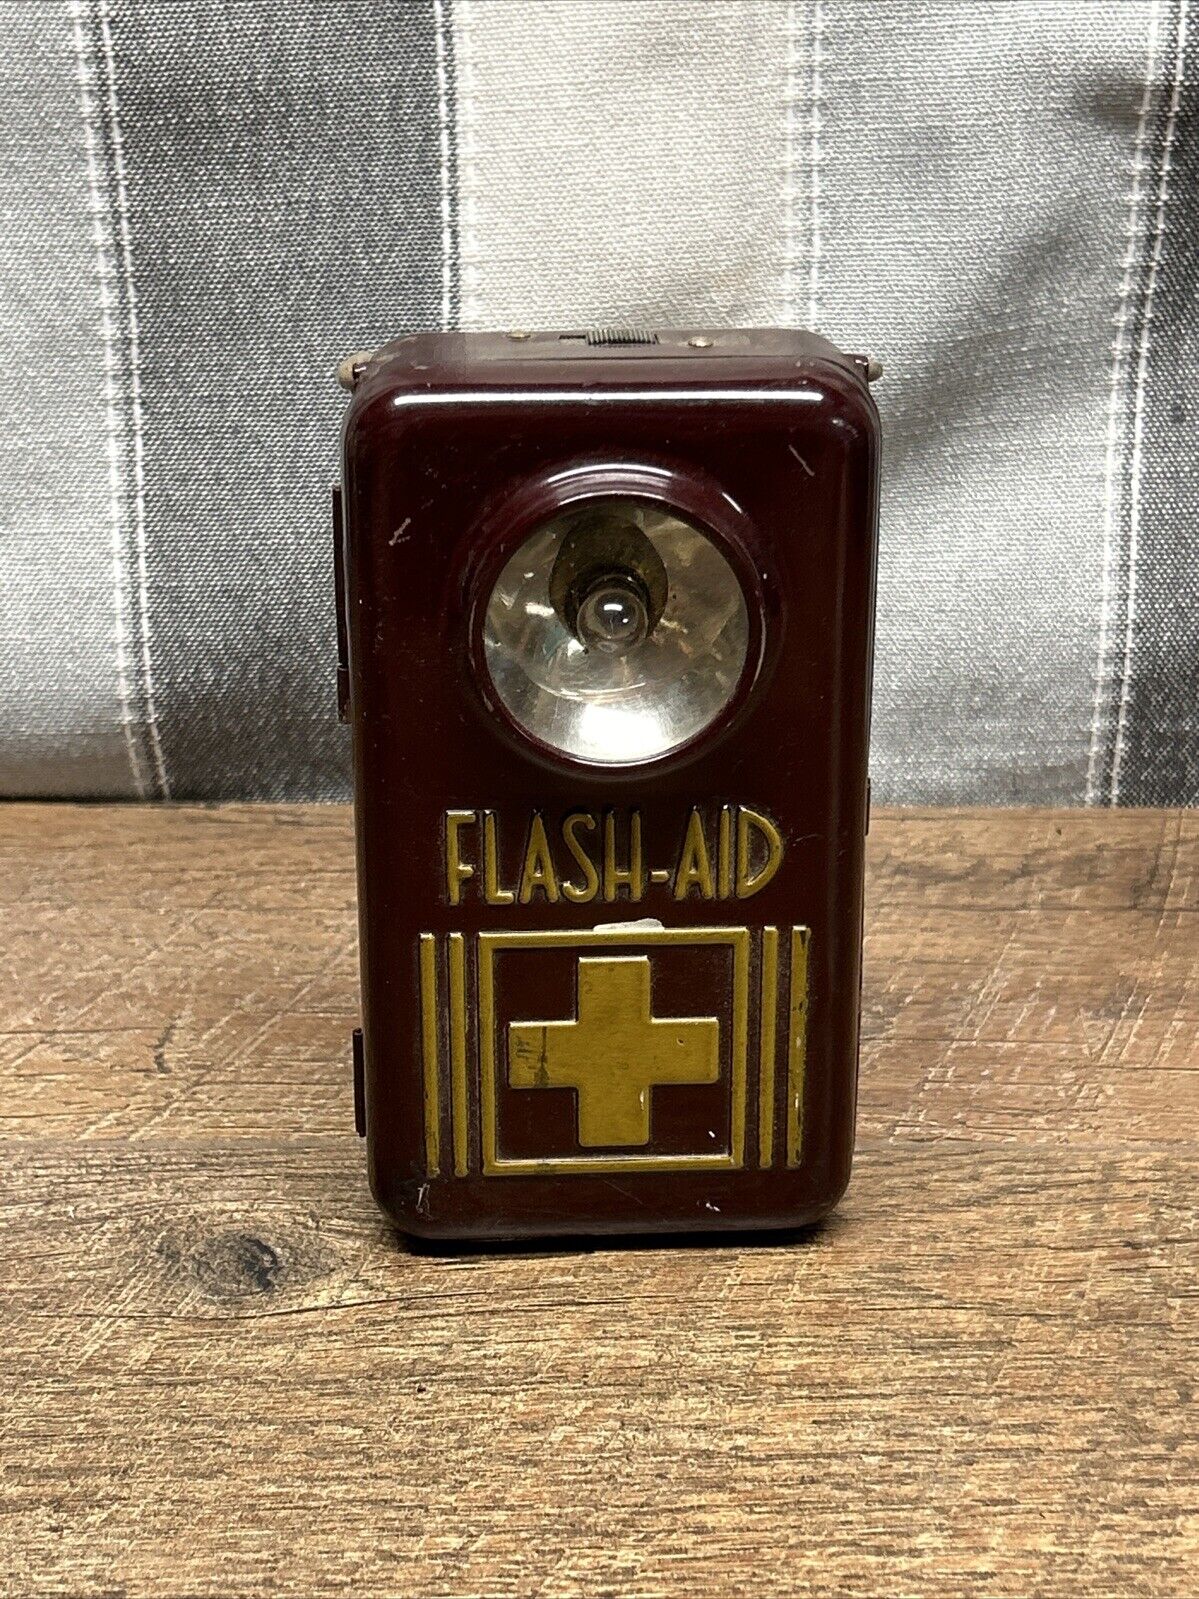 Vintage 1940s Lewyt Product Flash-Aid Flashlight First Aid Kit made in U.S.A